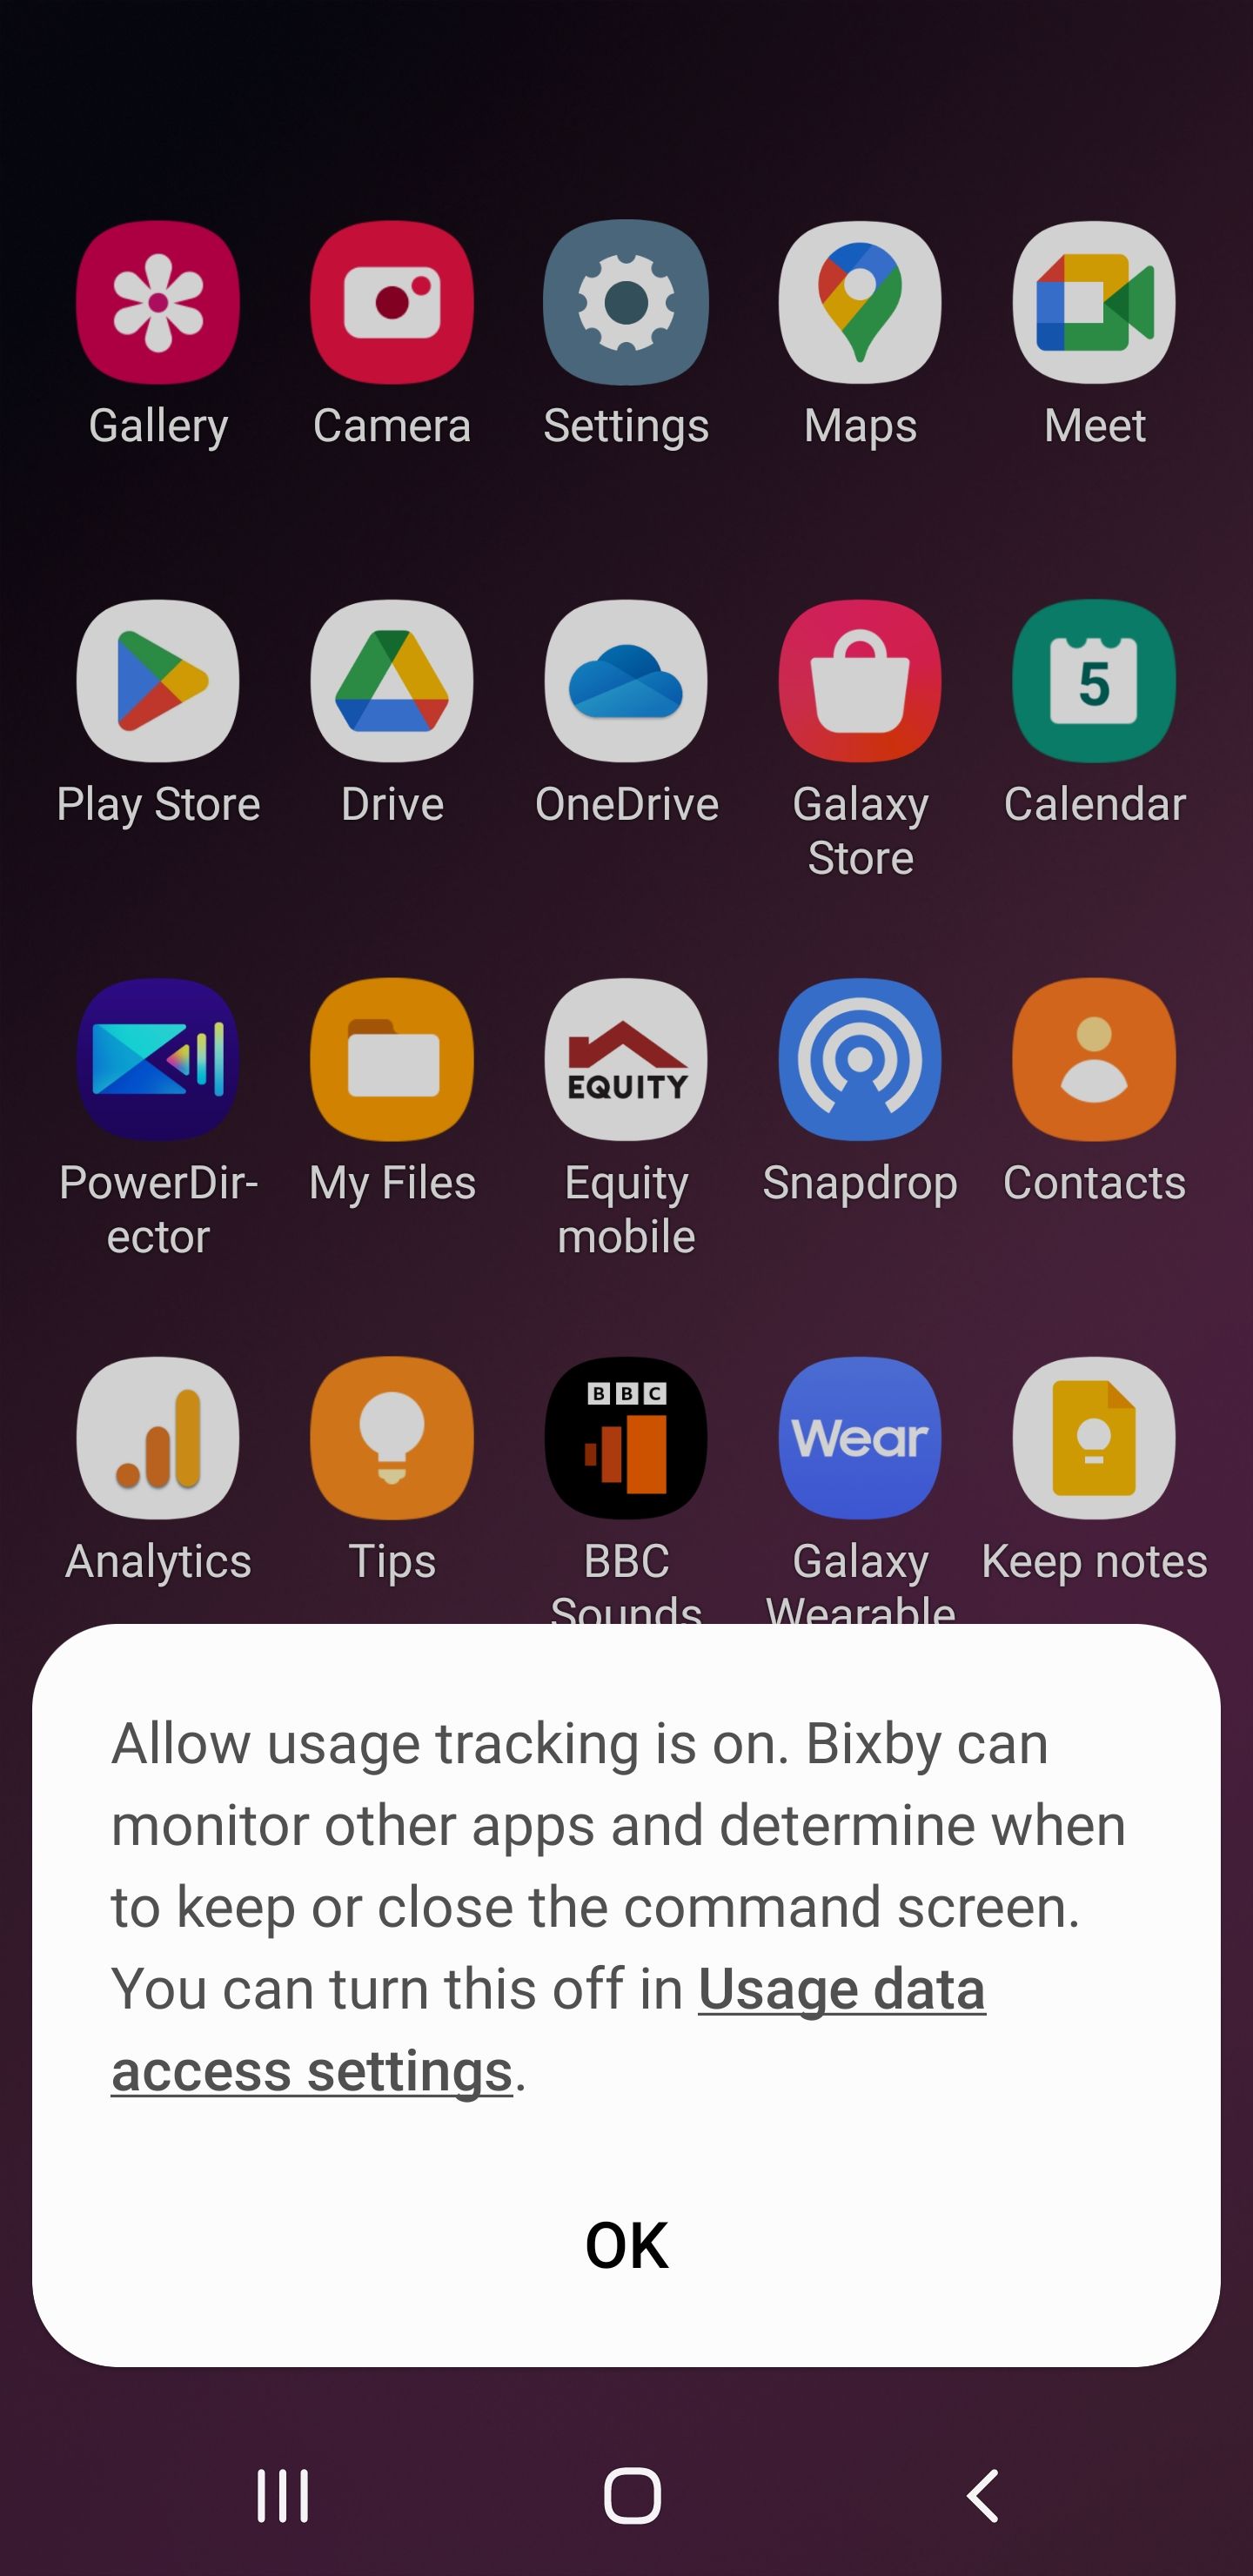 Bixby Usage tracking prompt